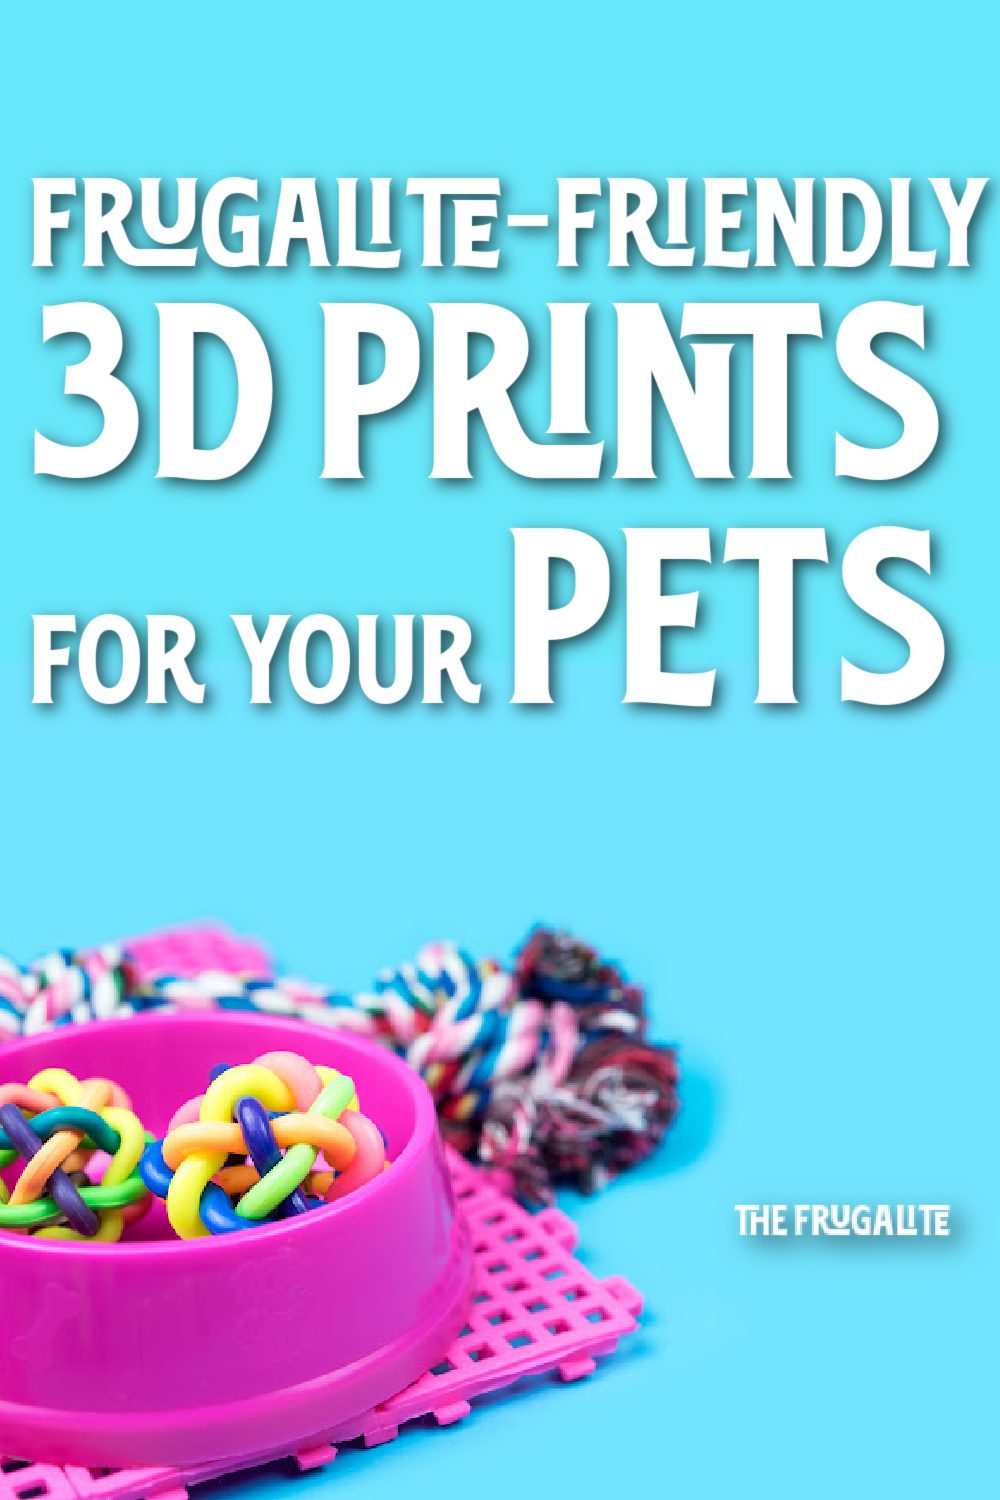 Frugalite-Friendly 3D Prints for Your Pets